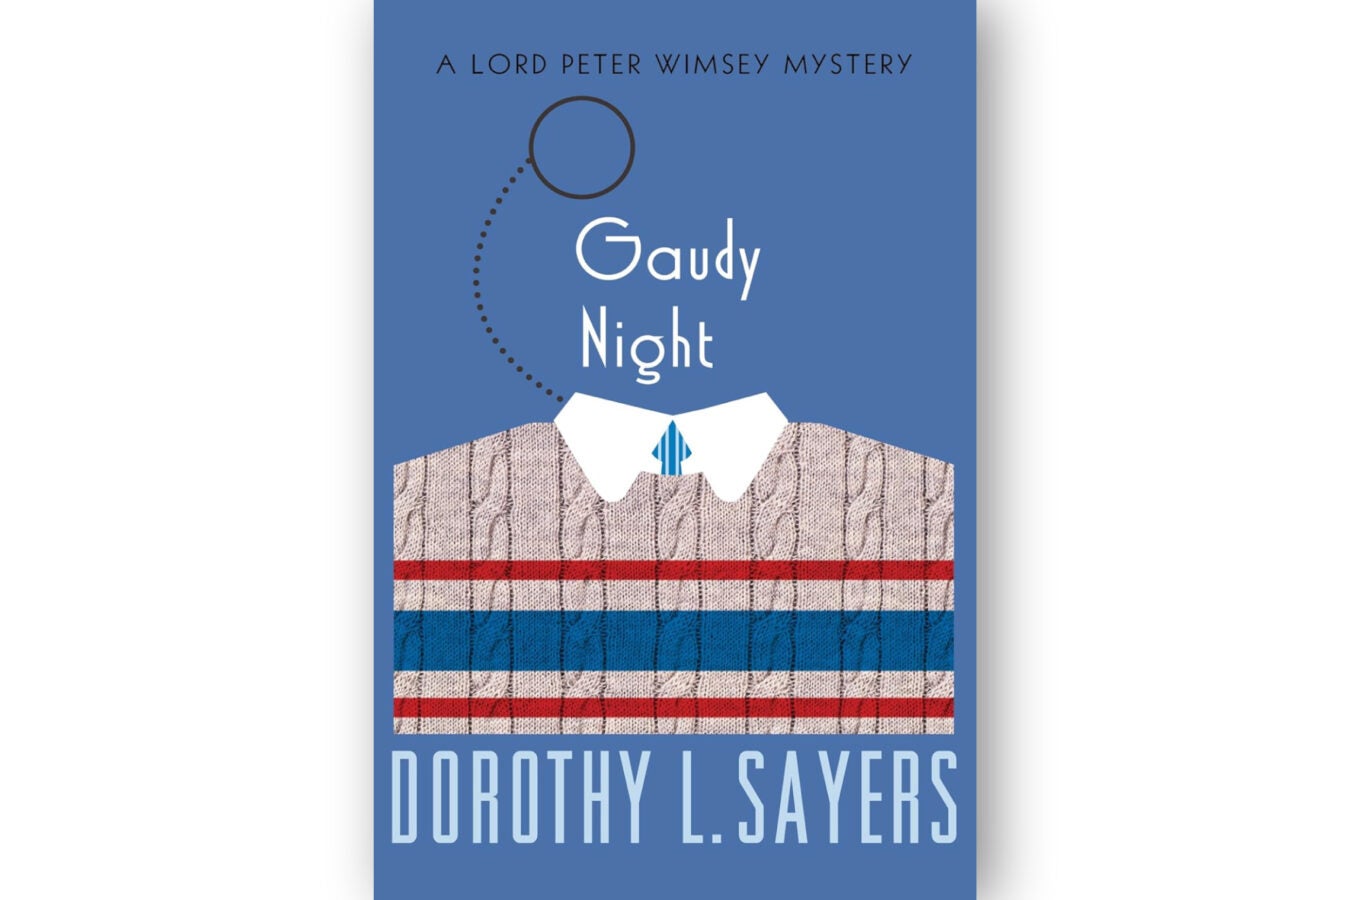 Book cover: "Gaudy Night" by Dorothy L. Sayers.